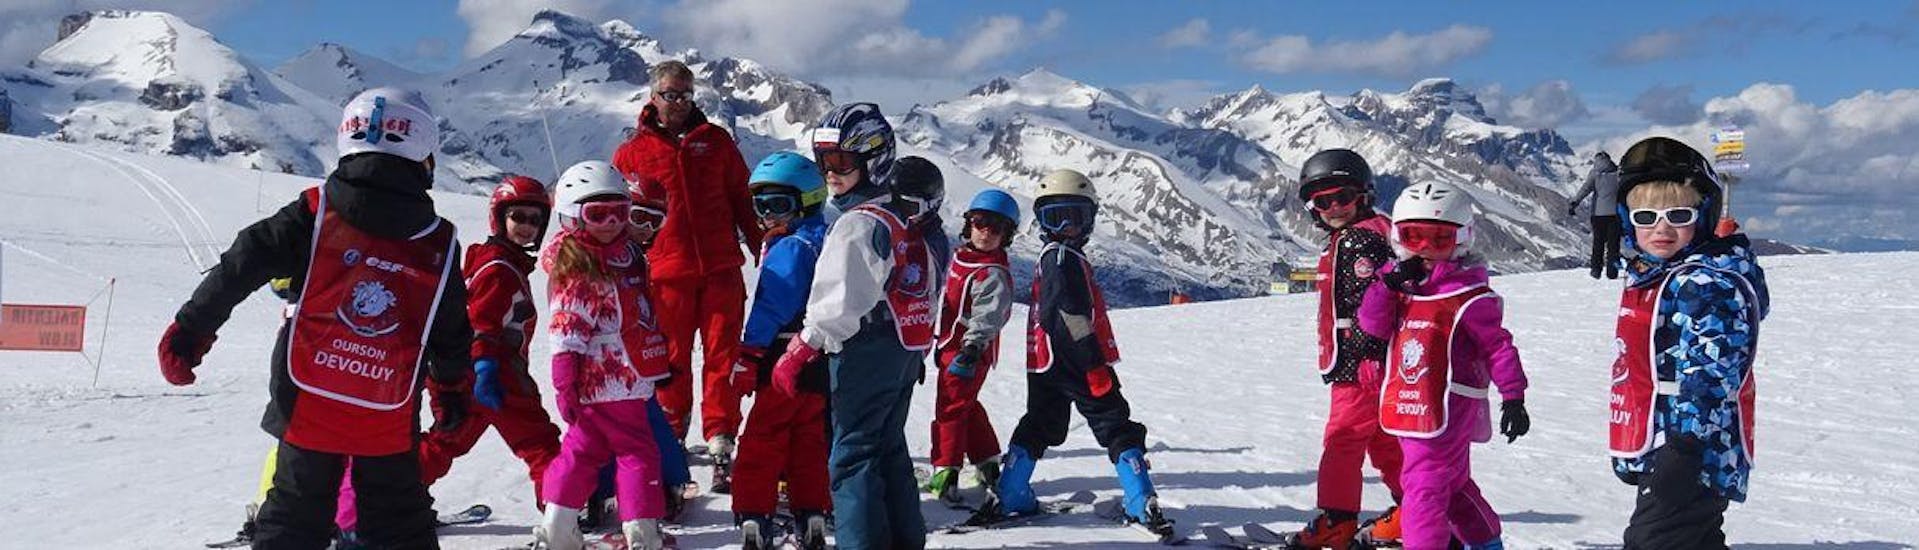 Kids are standing at the top of the slope ready to start their Kids Ski Lessons (6-12 years) - Intermediate with the ski school ESF du Dévoluy.